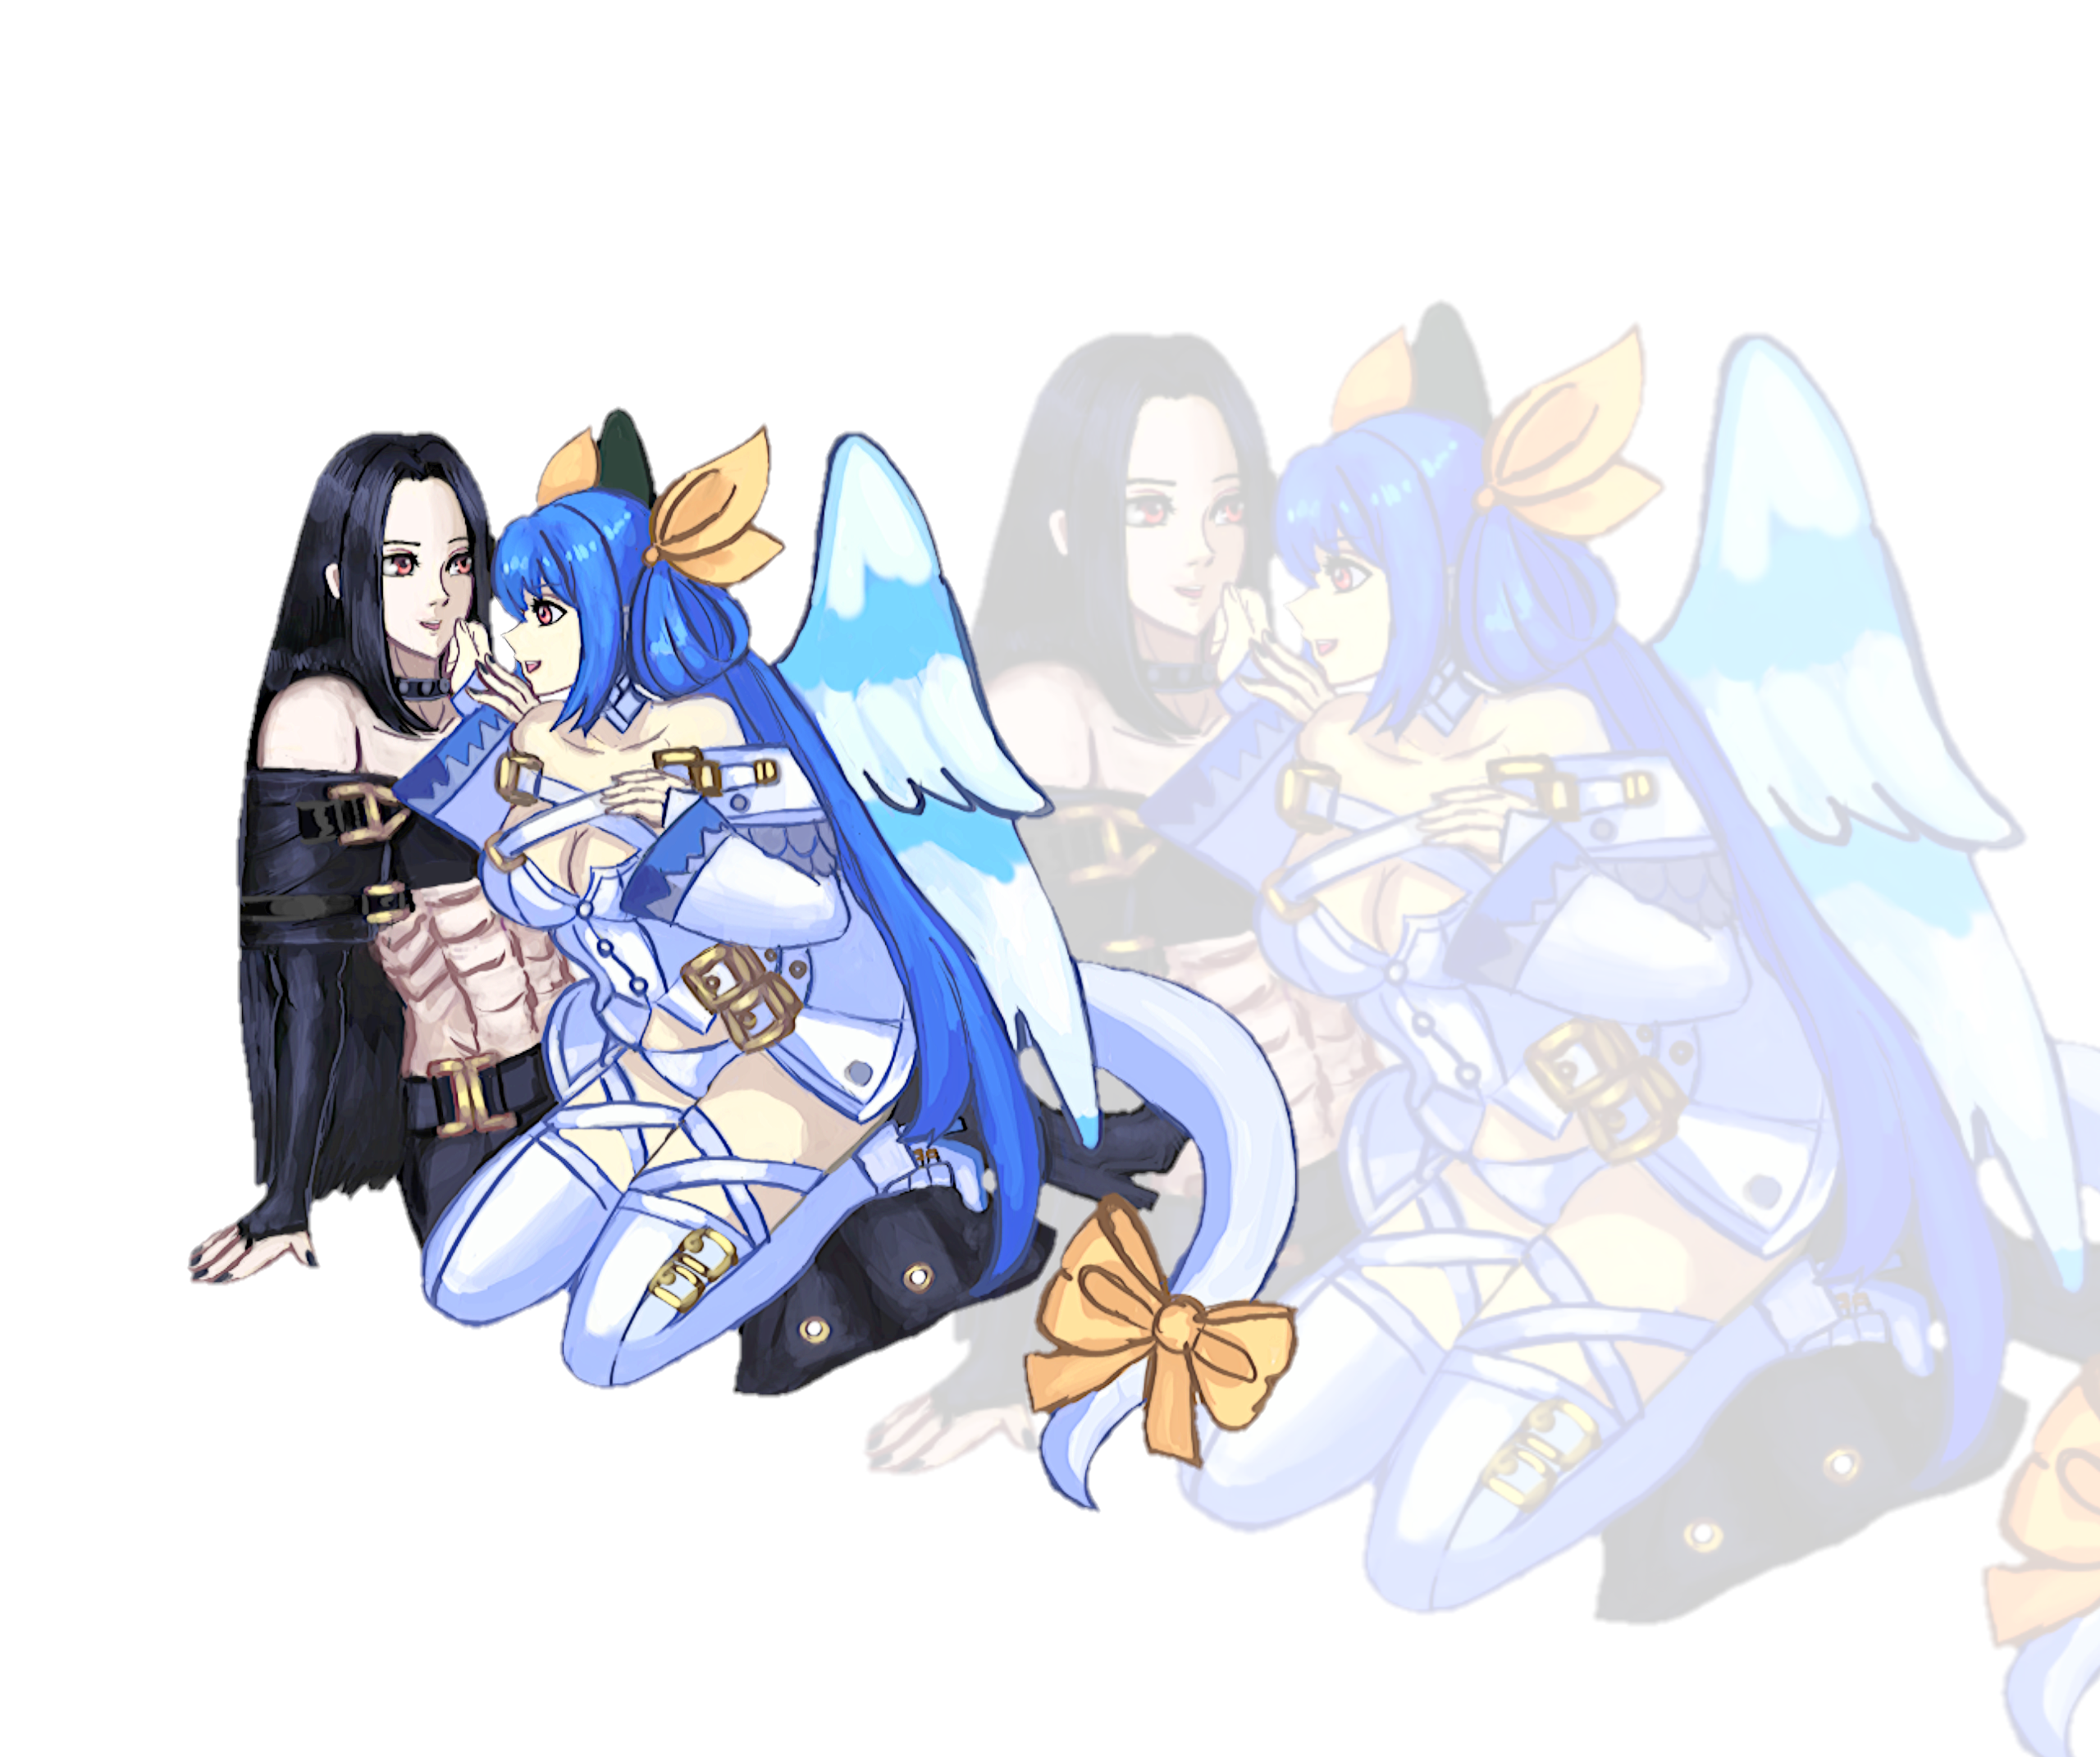 Anime 2560x2142 Guilty Gear video game art Dizzy (Guilty Gear) anime girl with wings anime girls Testament (guilty gear) Fighting Games couple blue hair Testament x Dizzy